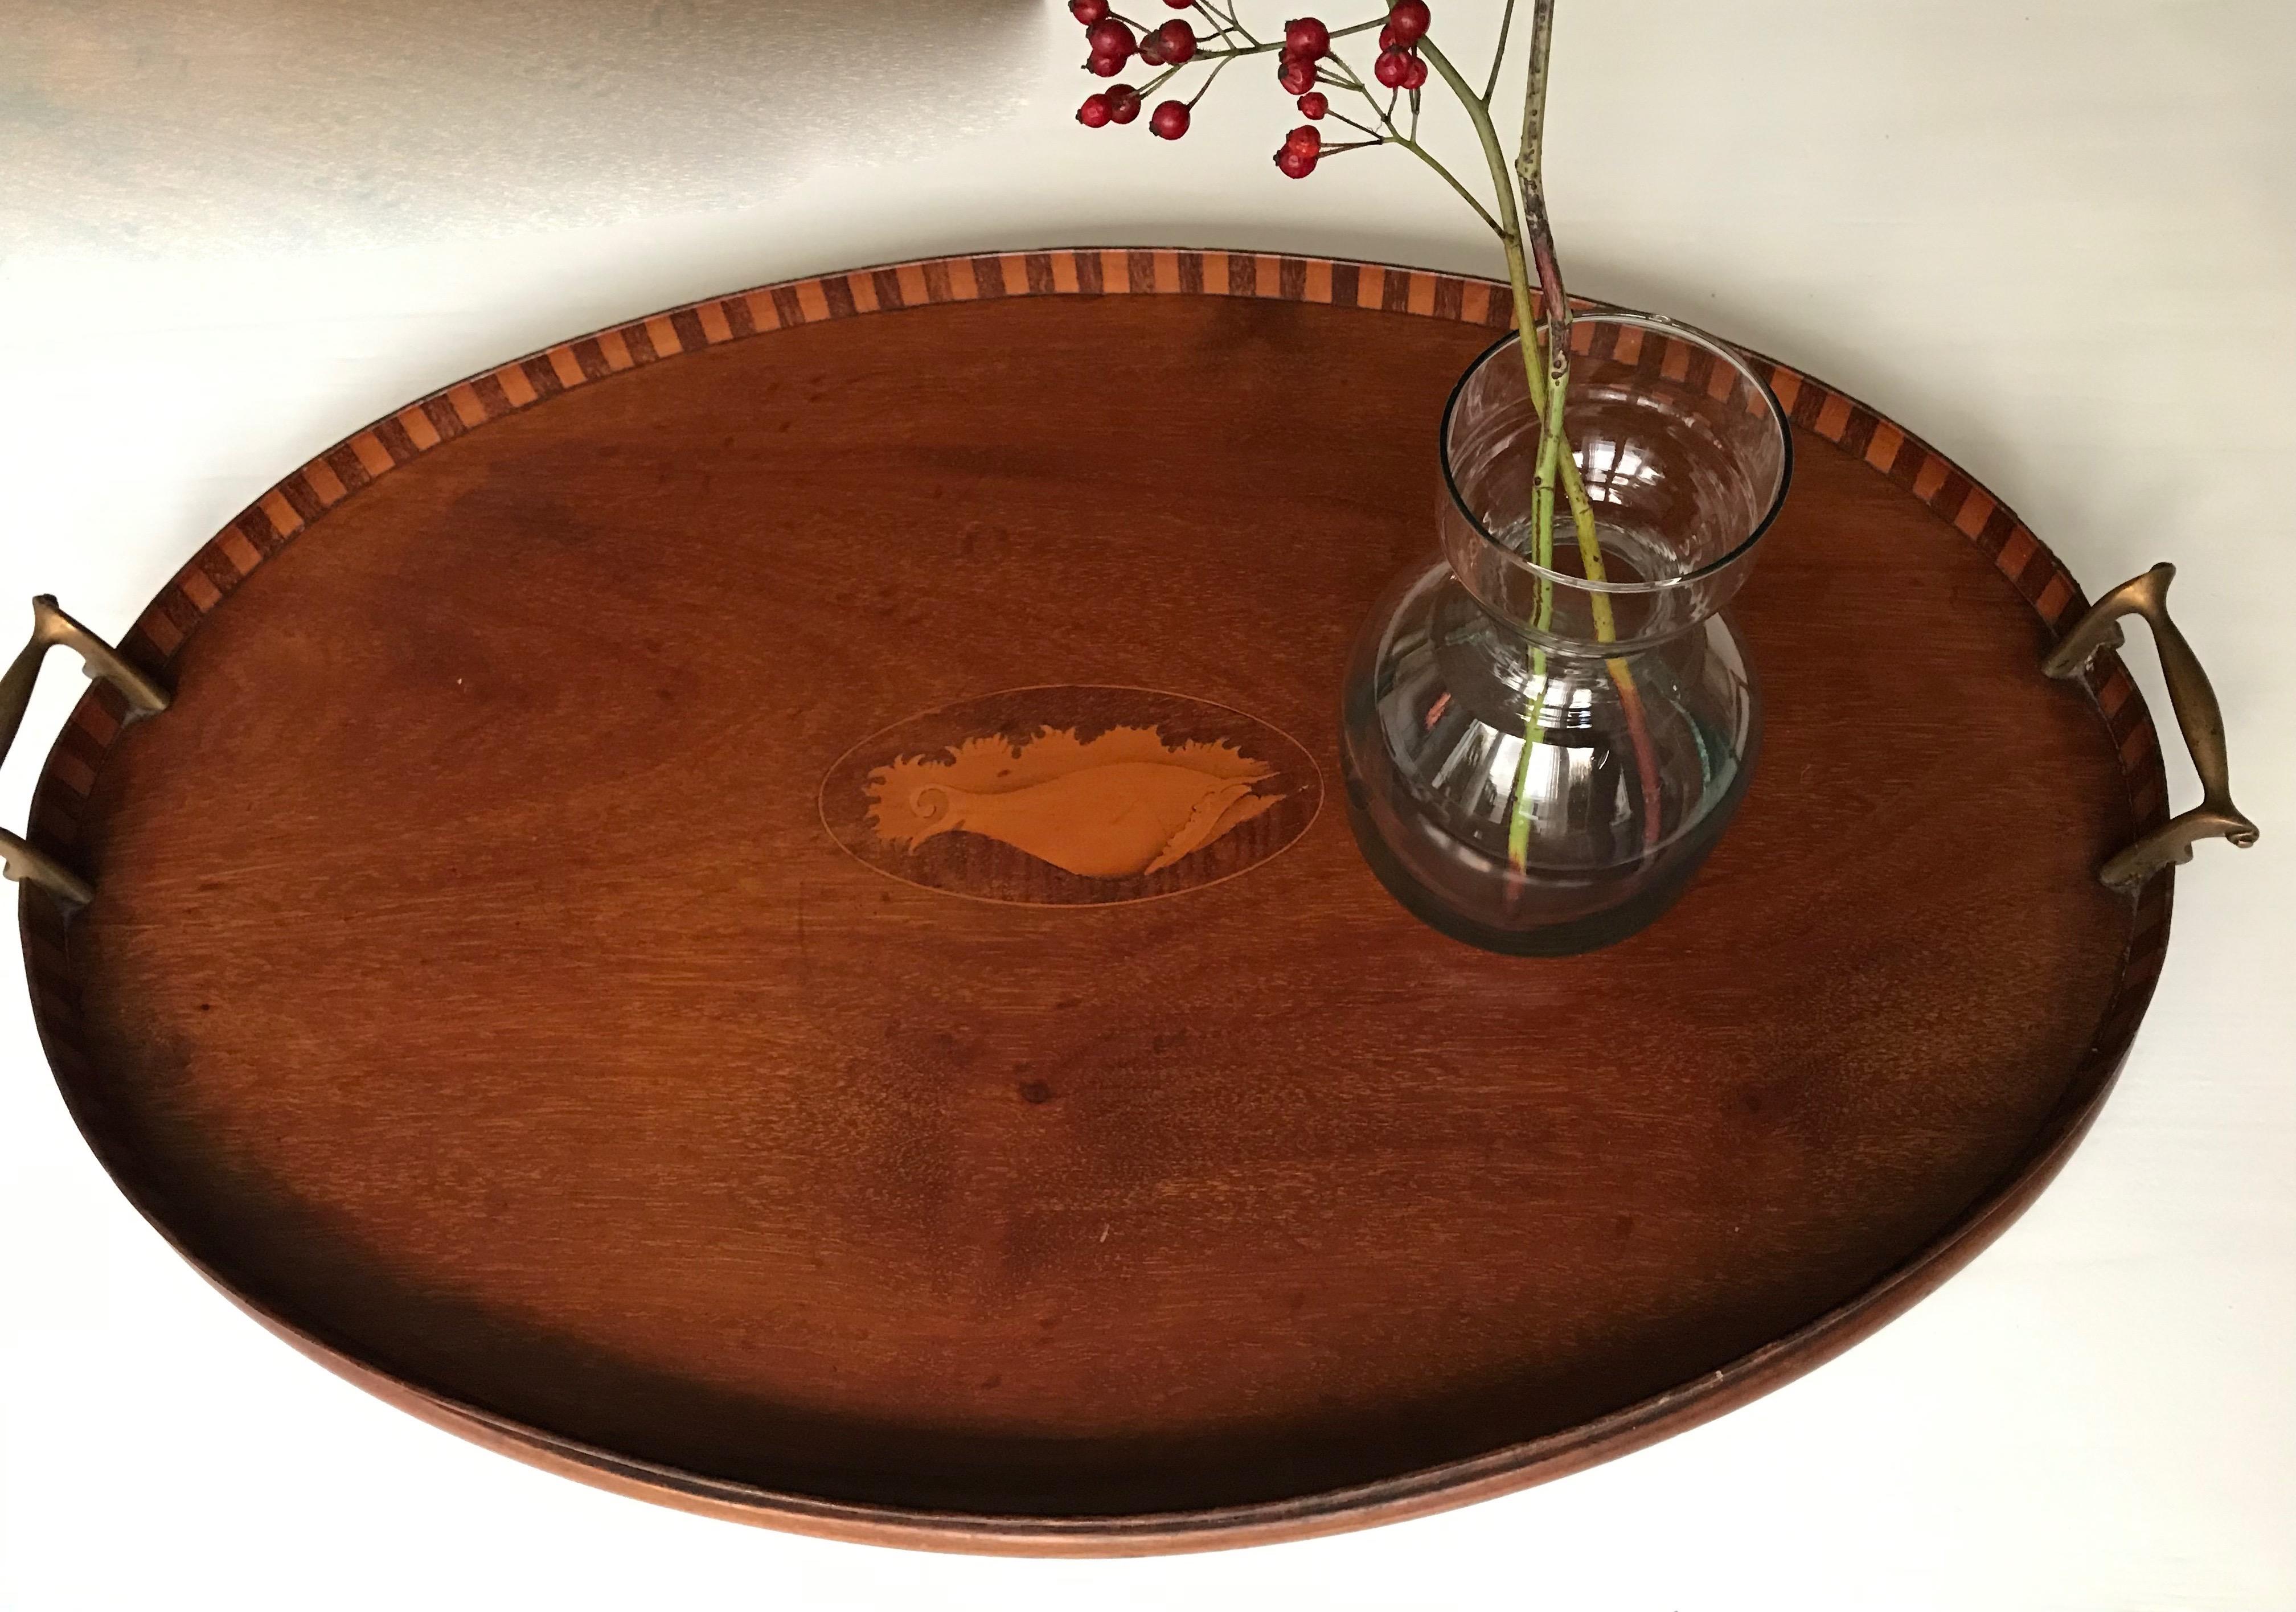 Practical and decorative, large serving tray.

If you are looking for a large, stylish, decorative and good quality antique serving tray then this Fine example could be the one for you. The outside rim is beautifully inlaid with so called intarsia